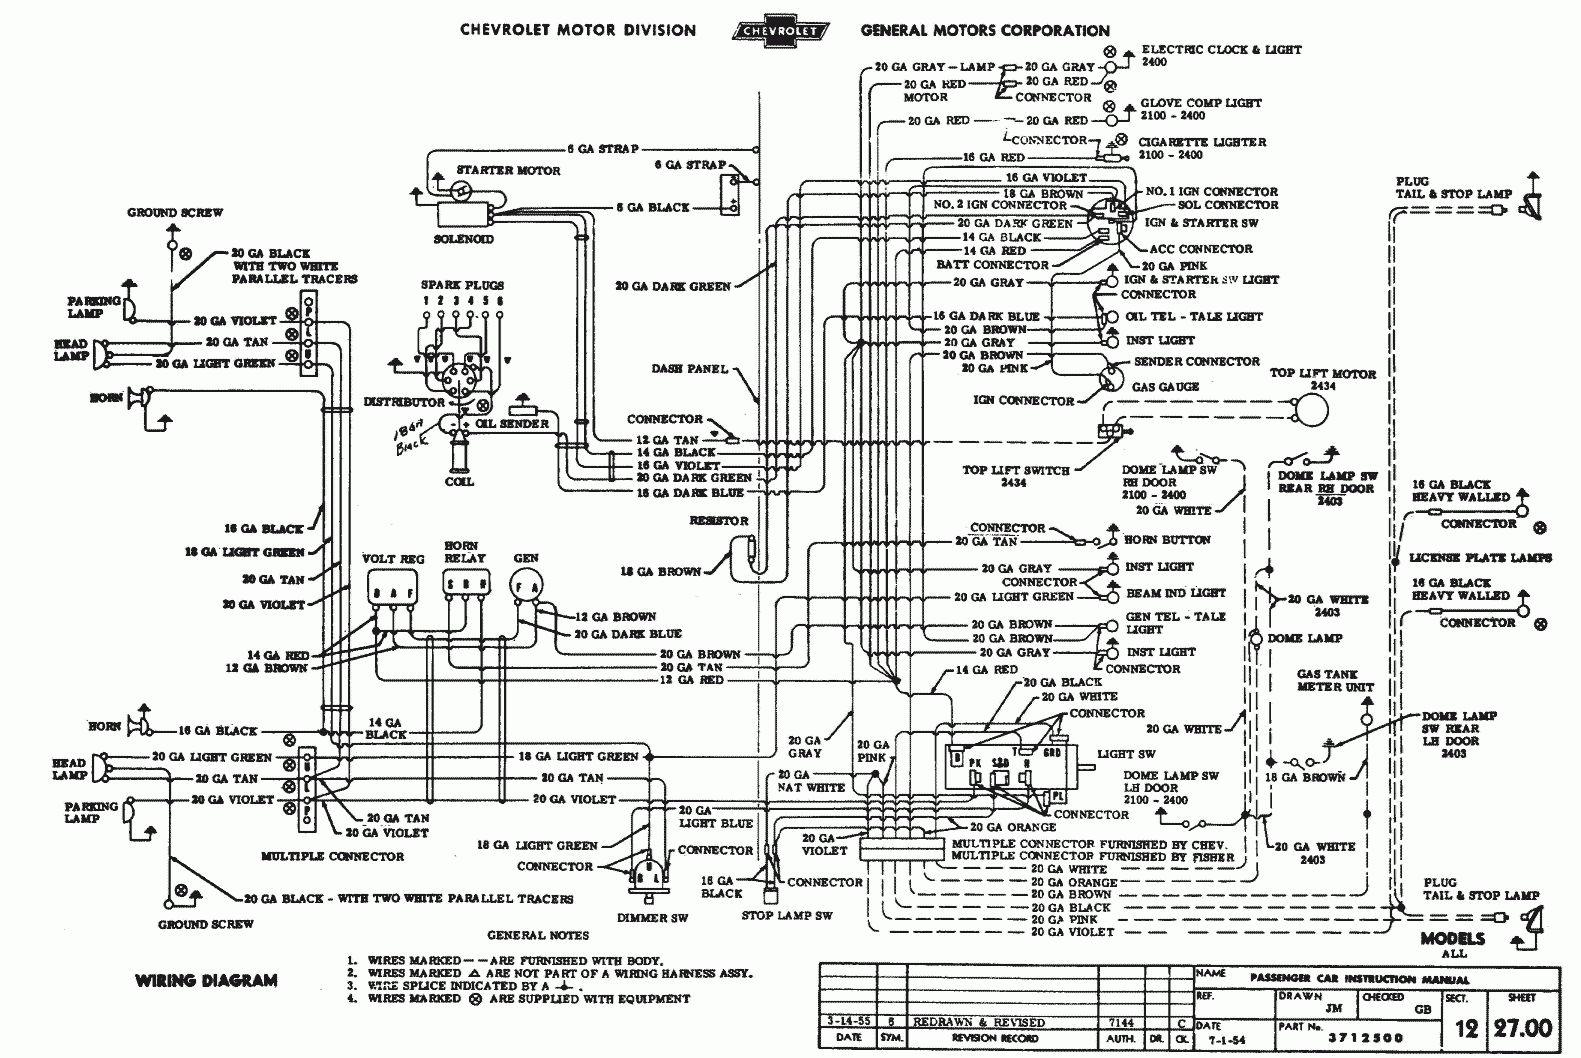 55 Chevy Wire Harness | Wiring Diagram - Chevy Express Tail Light Wiring Diagram